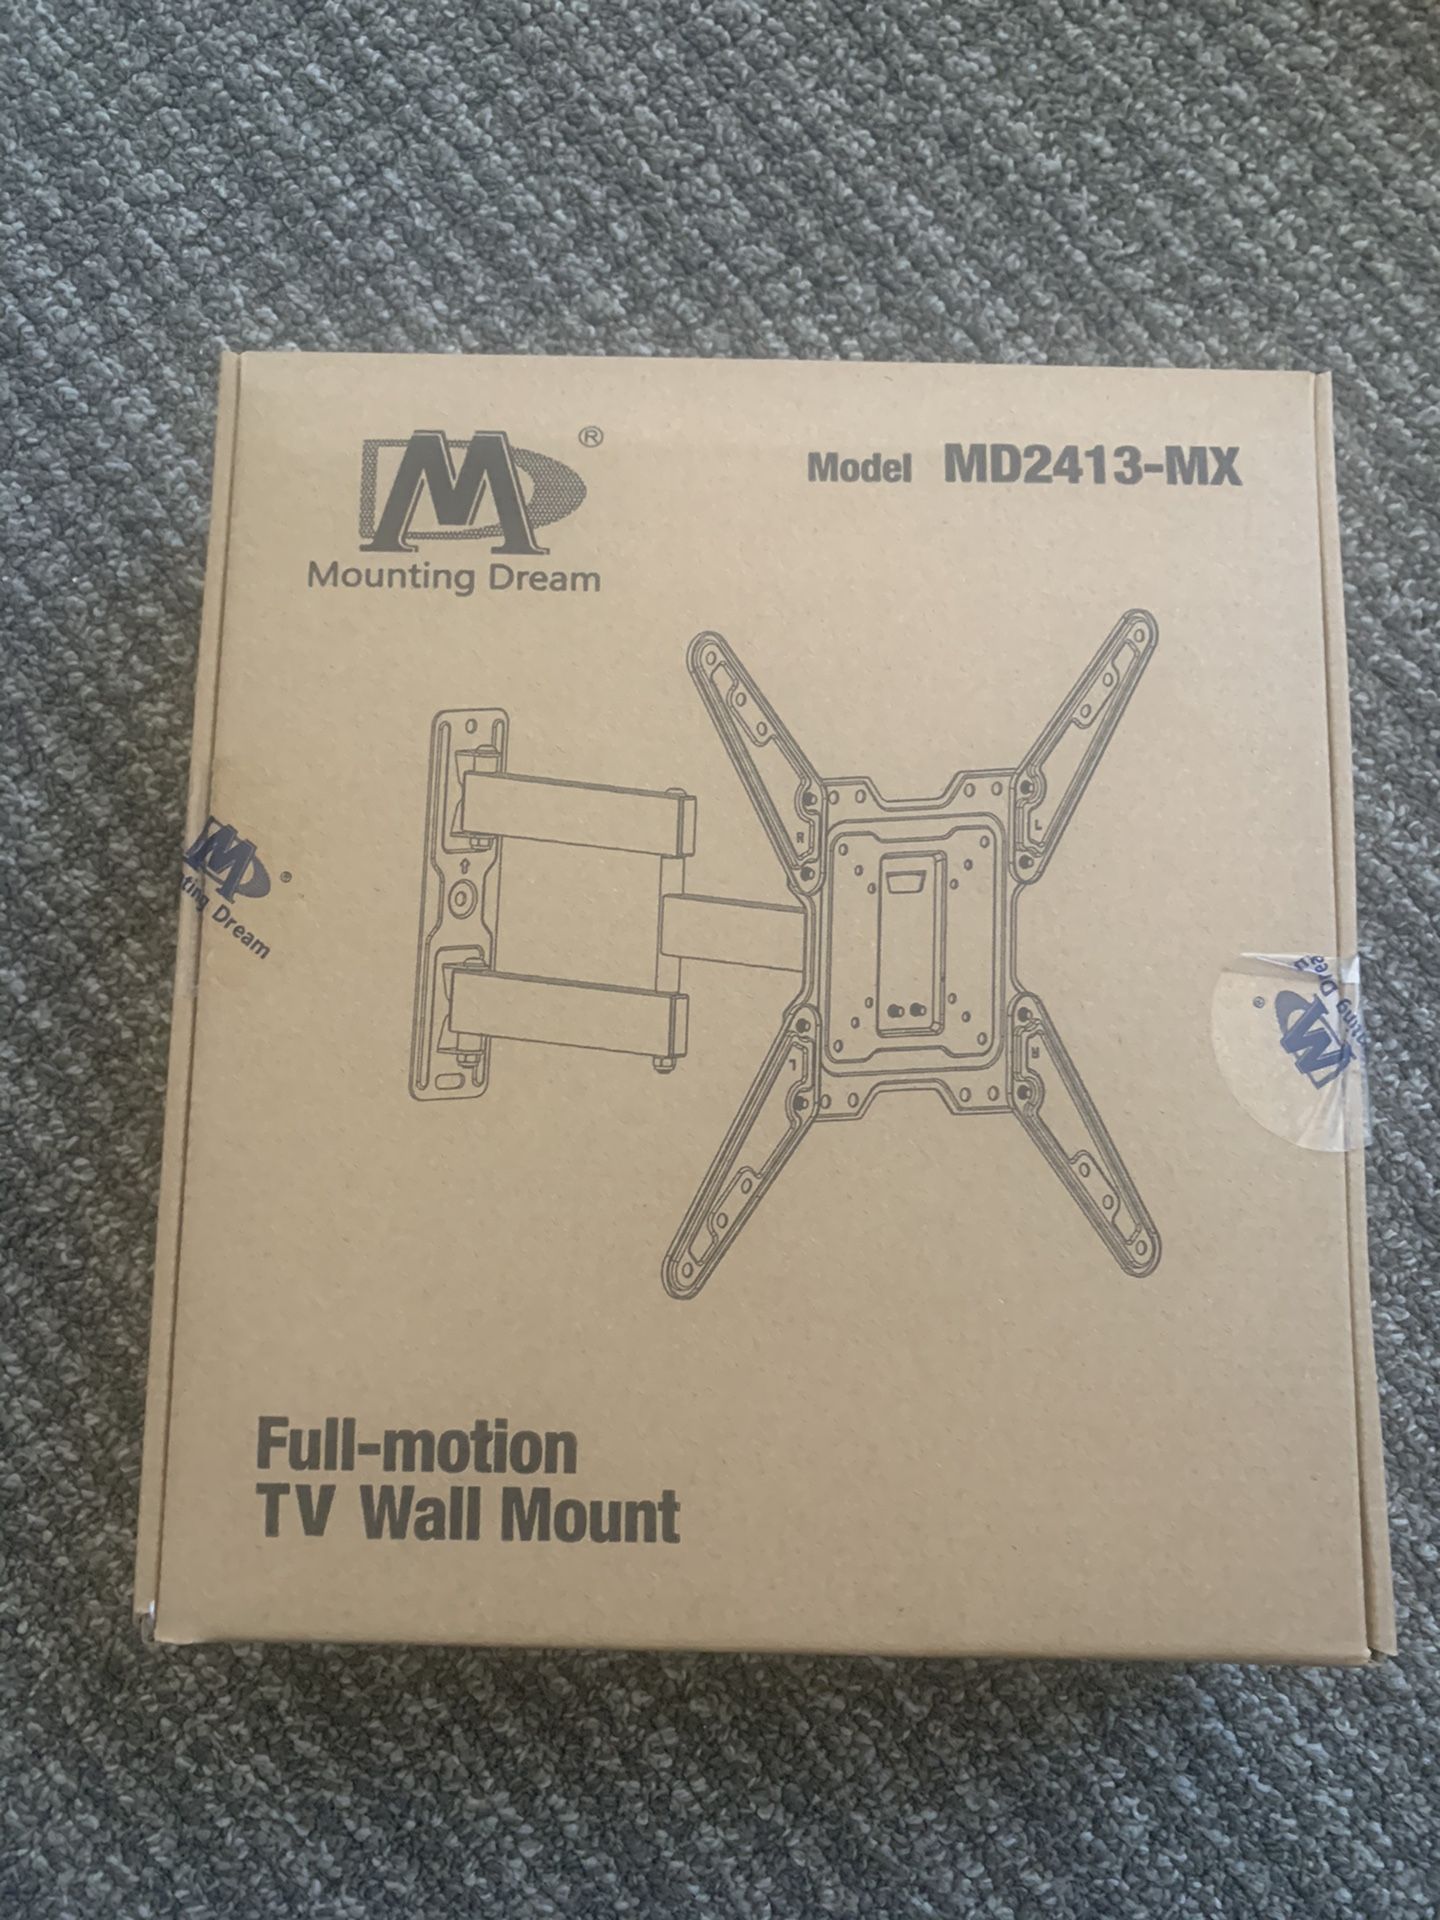 TV wall mount for sale. Full motion up to 55 inches